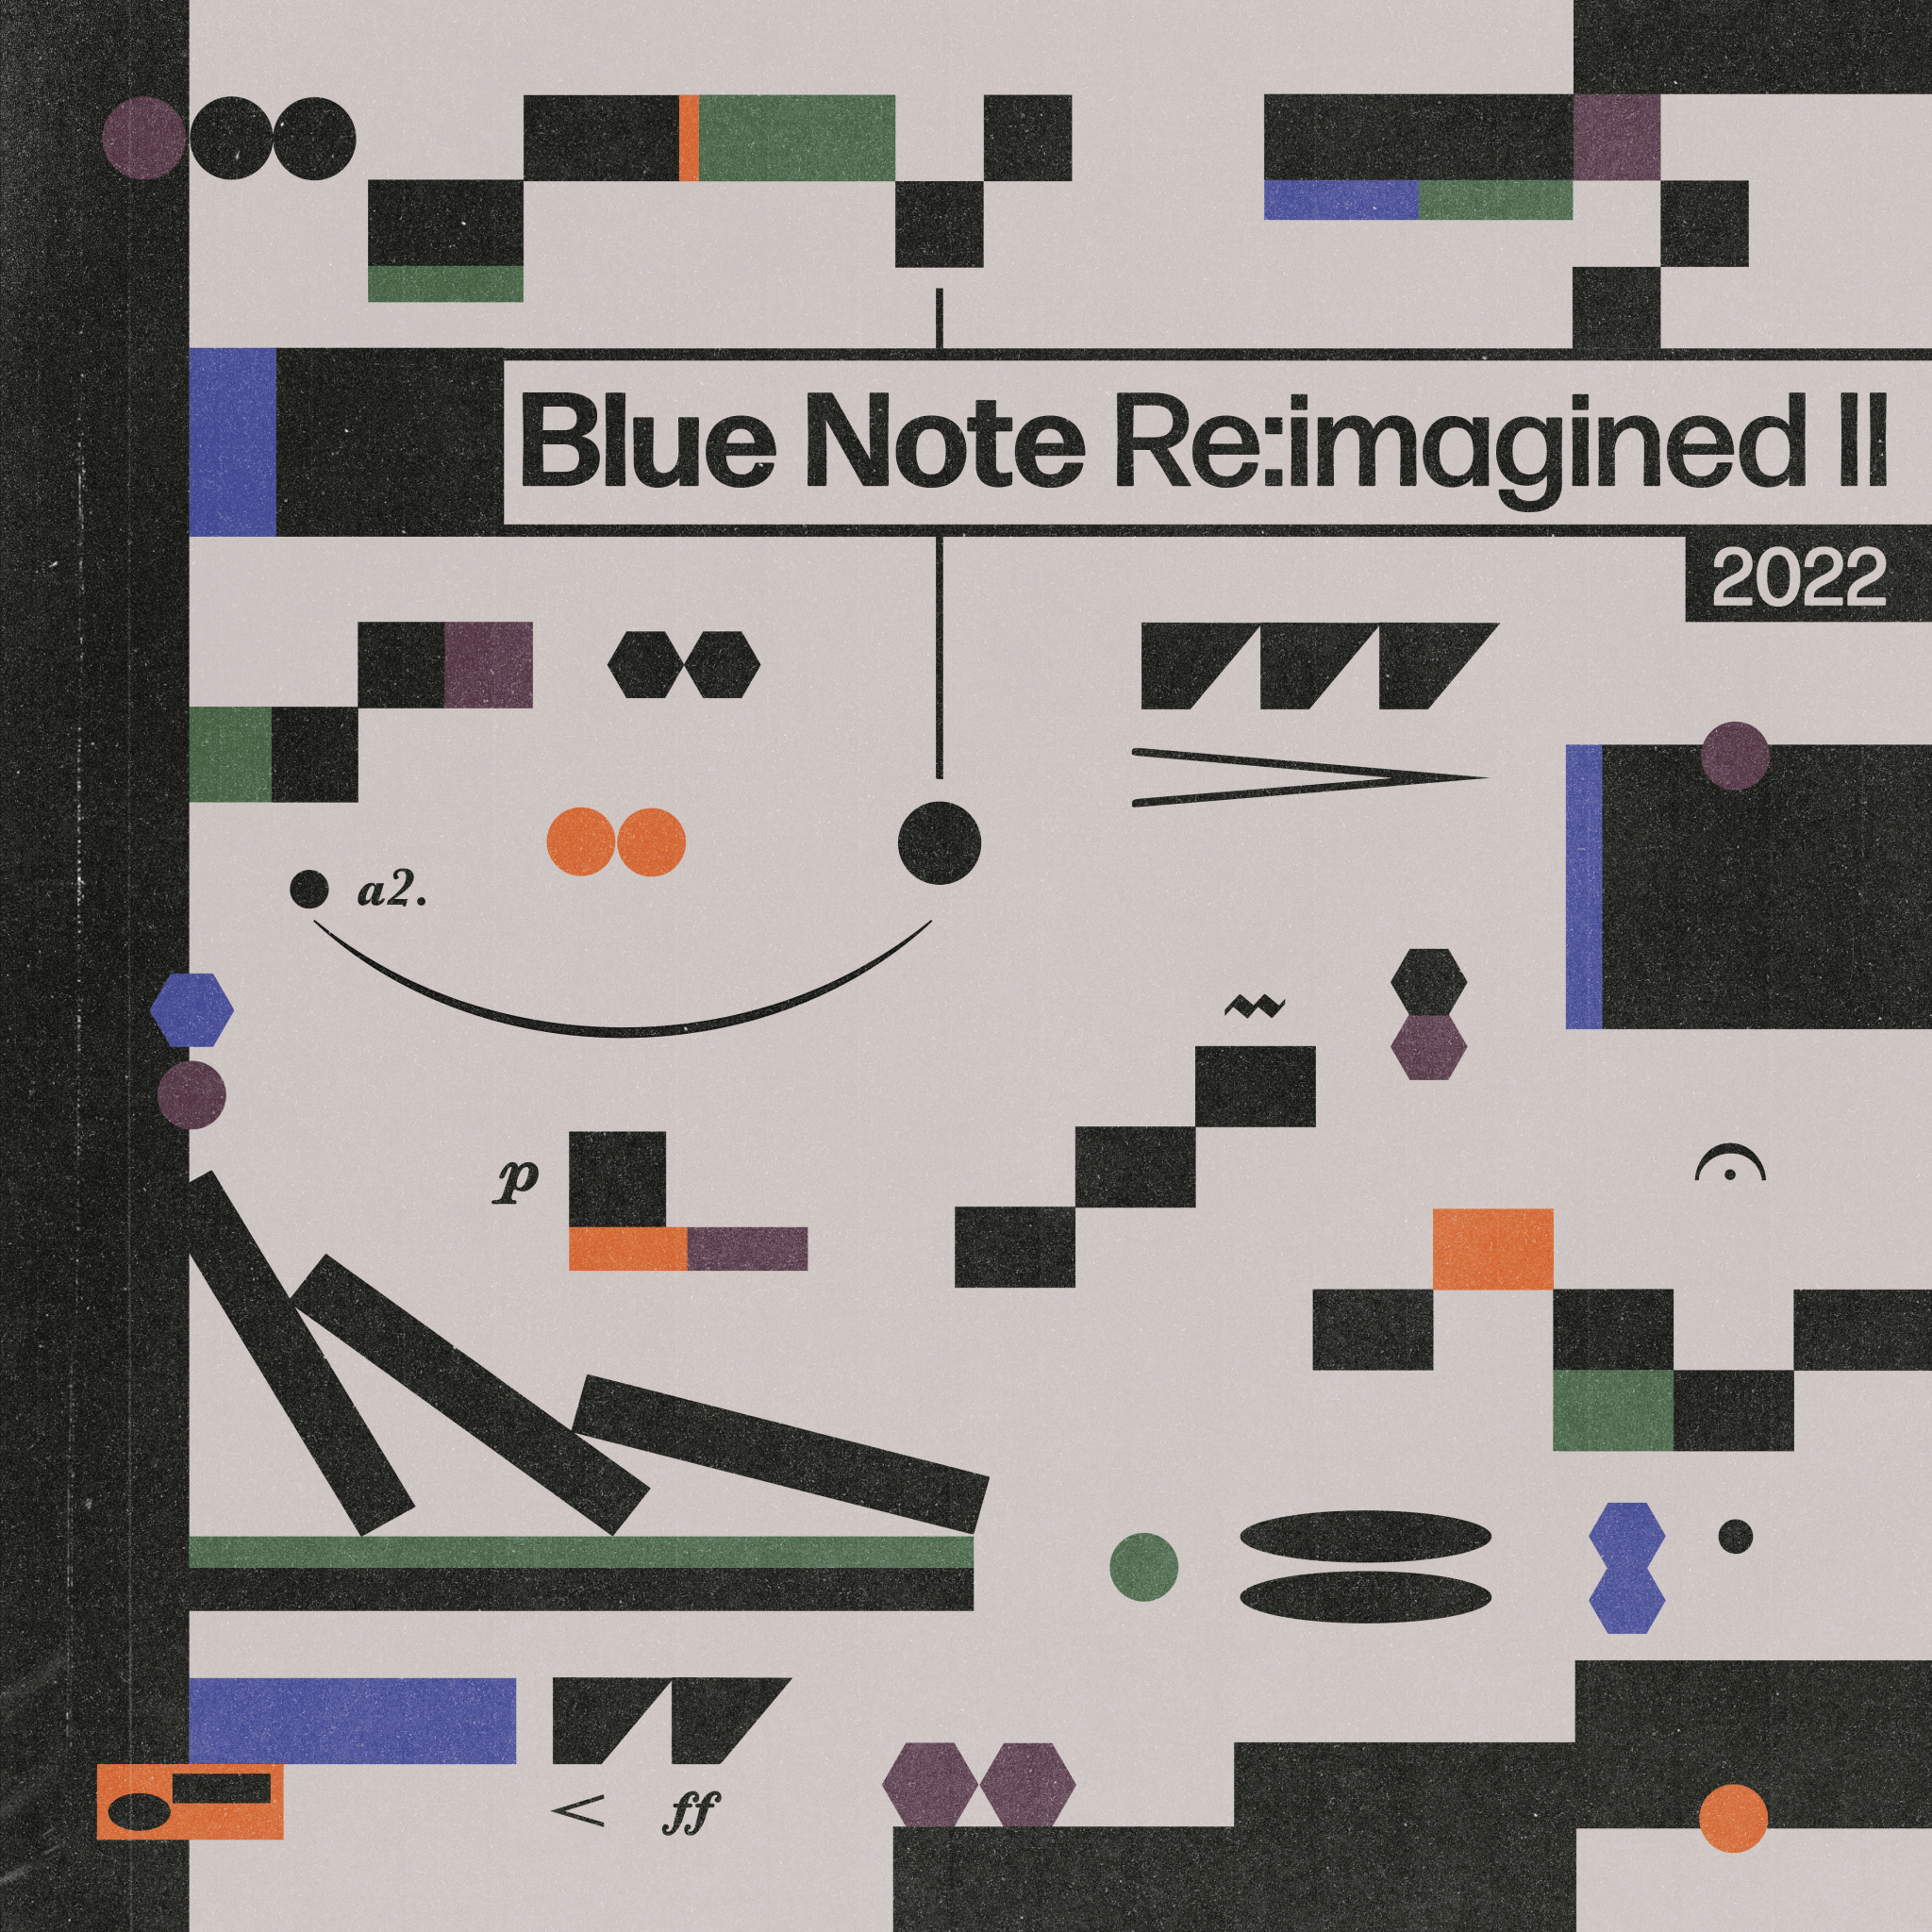 Blue Note Records Announces  Blue Note Re:imagined II  out Sept. 30